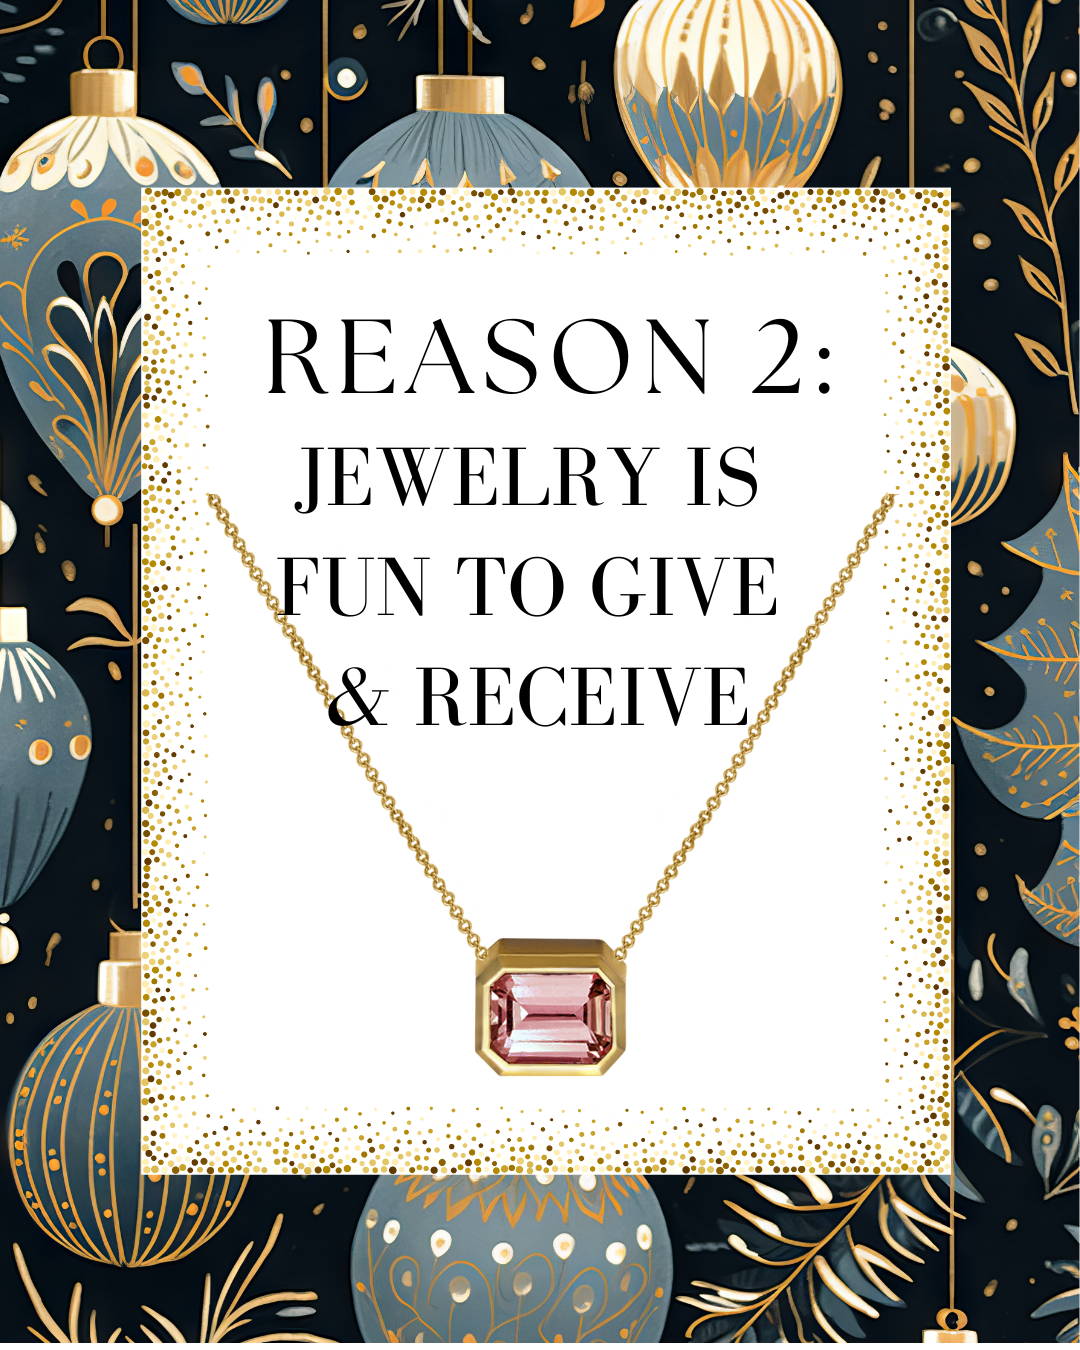 Jewelry is as fun to give as it is to receive. Pink sapphire necklace in 18 karat yellow gold. Emerald cut pink sapphire.